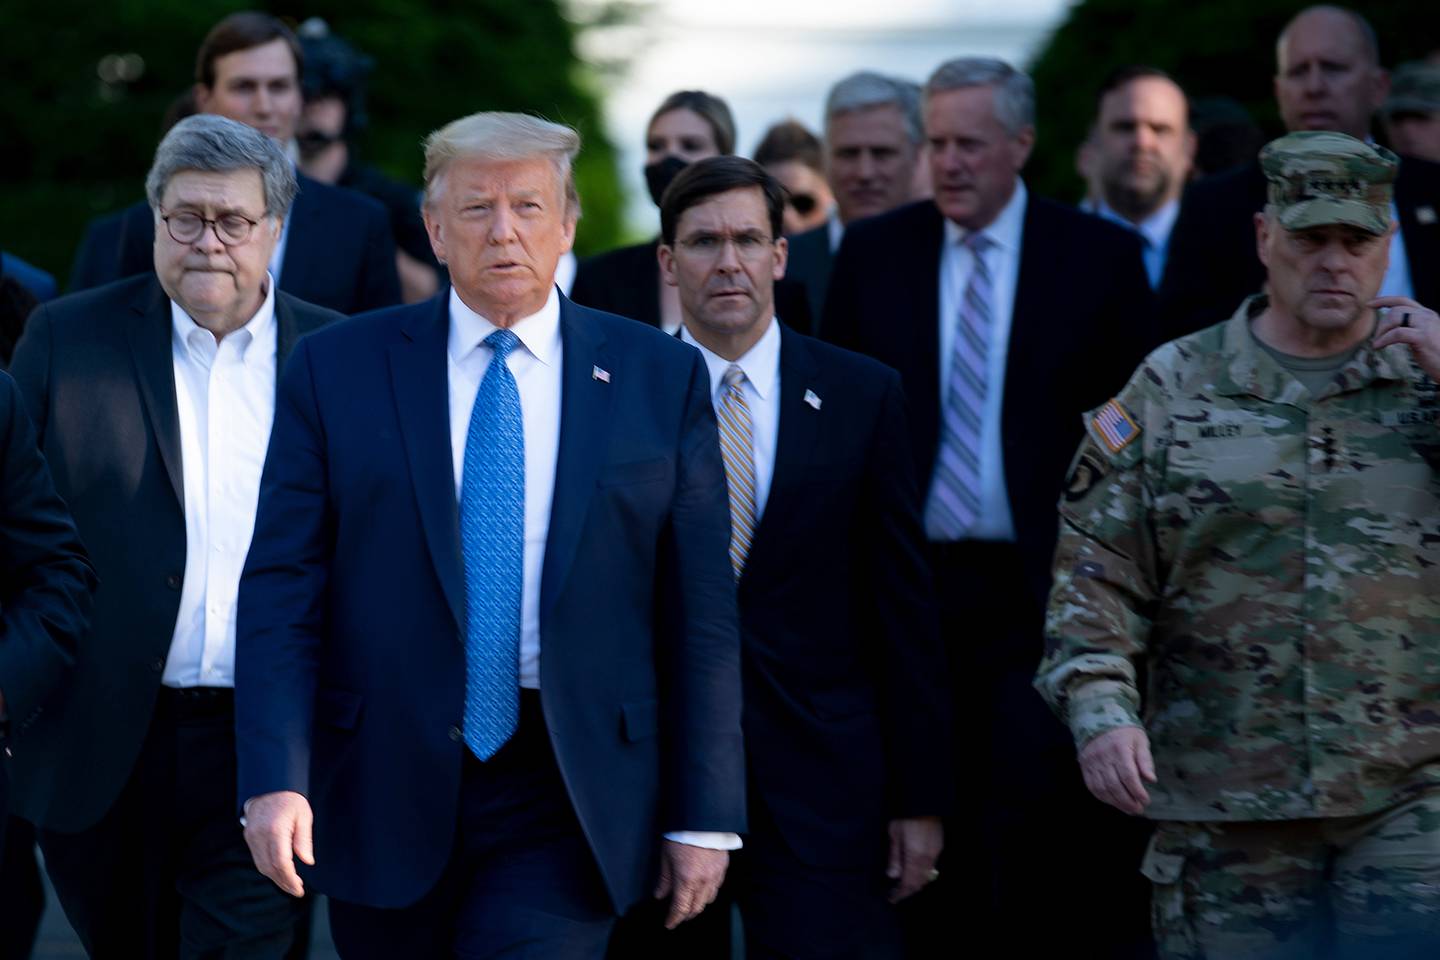 President Donald Trump walks with Attorney General William Barr, left, Secretary of Defense Mark Esper ,center, Chairman of the Joint Chiefs of Staff Gen. Mark A. Milley, right, and others from the White House to visit St. John's Church after the area was cleared of people protesting the death of George Floyd June 1, 2020, in Washington.